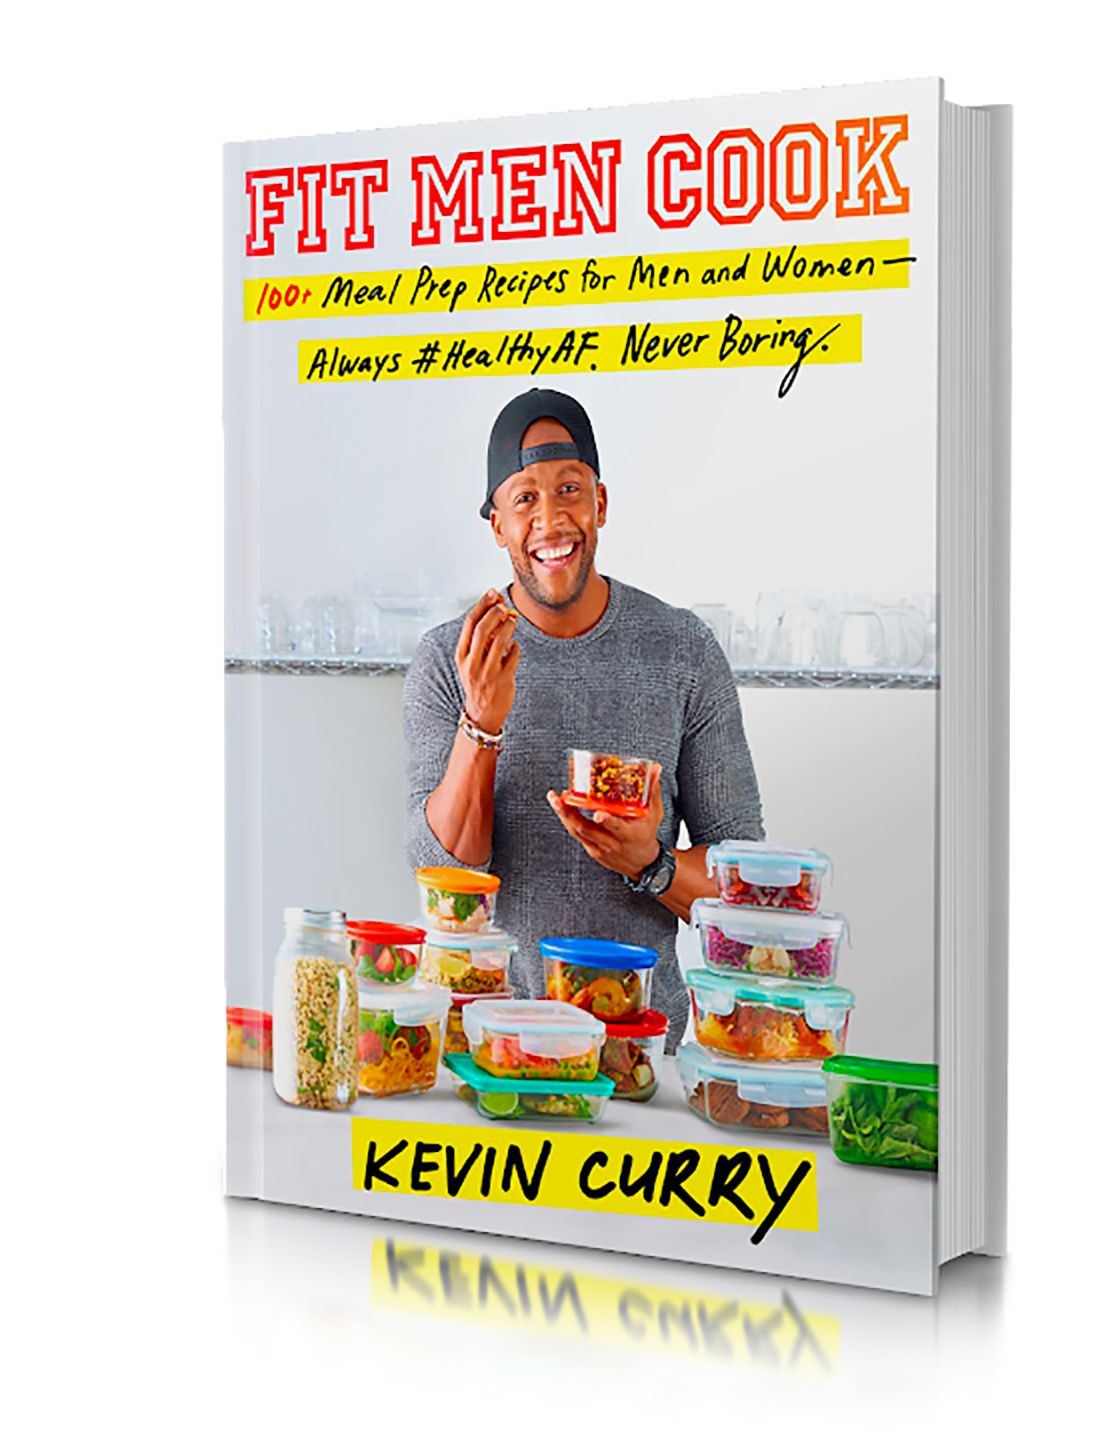 KEVIN-CURRY-BOOK-WEBSITE.jpg